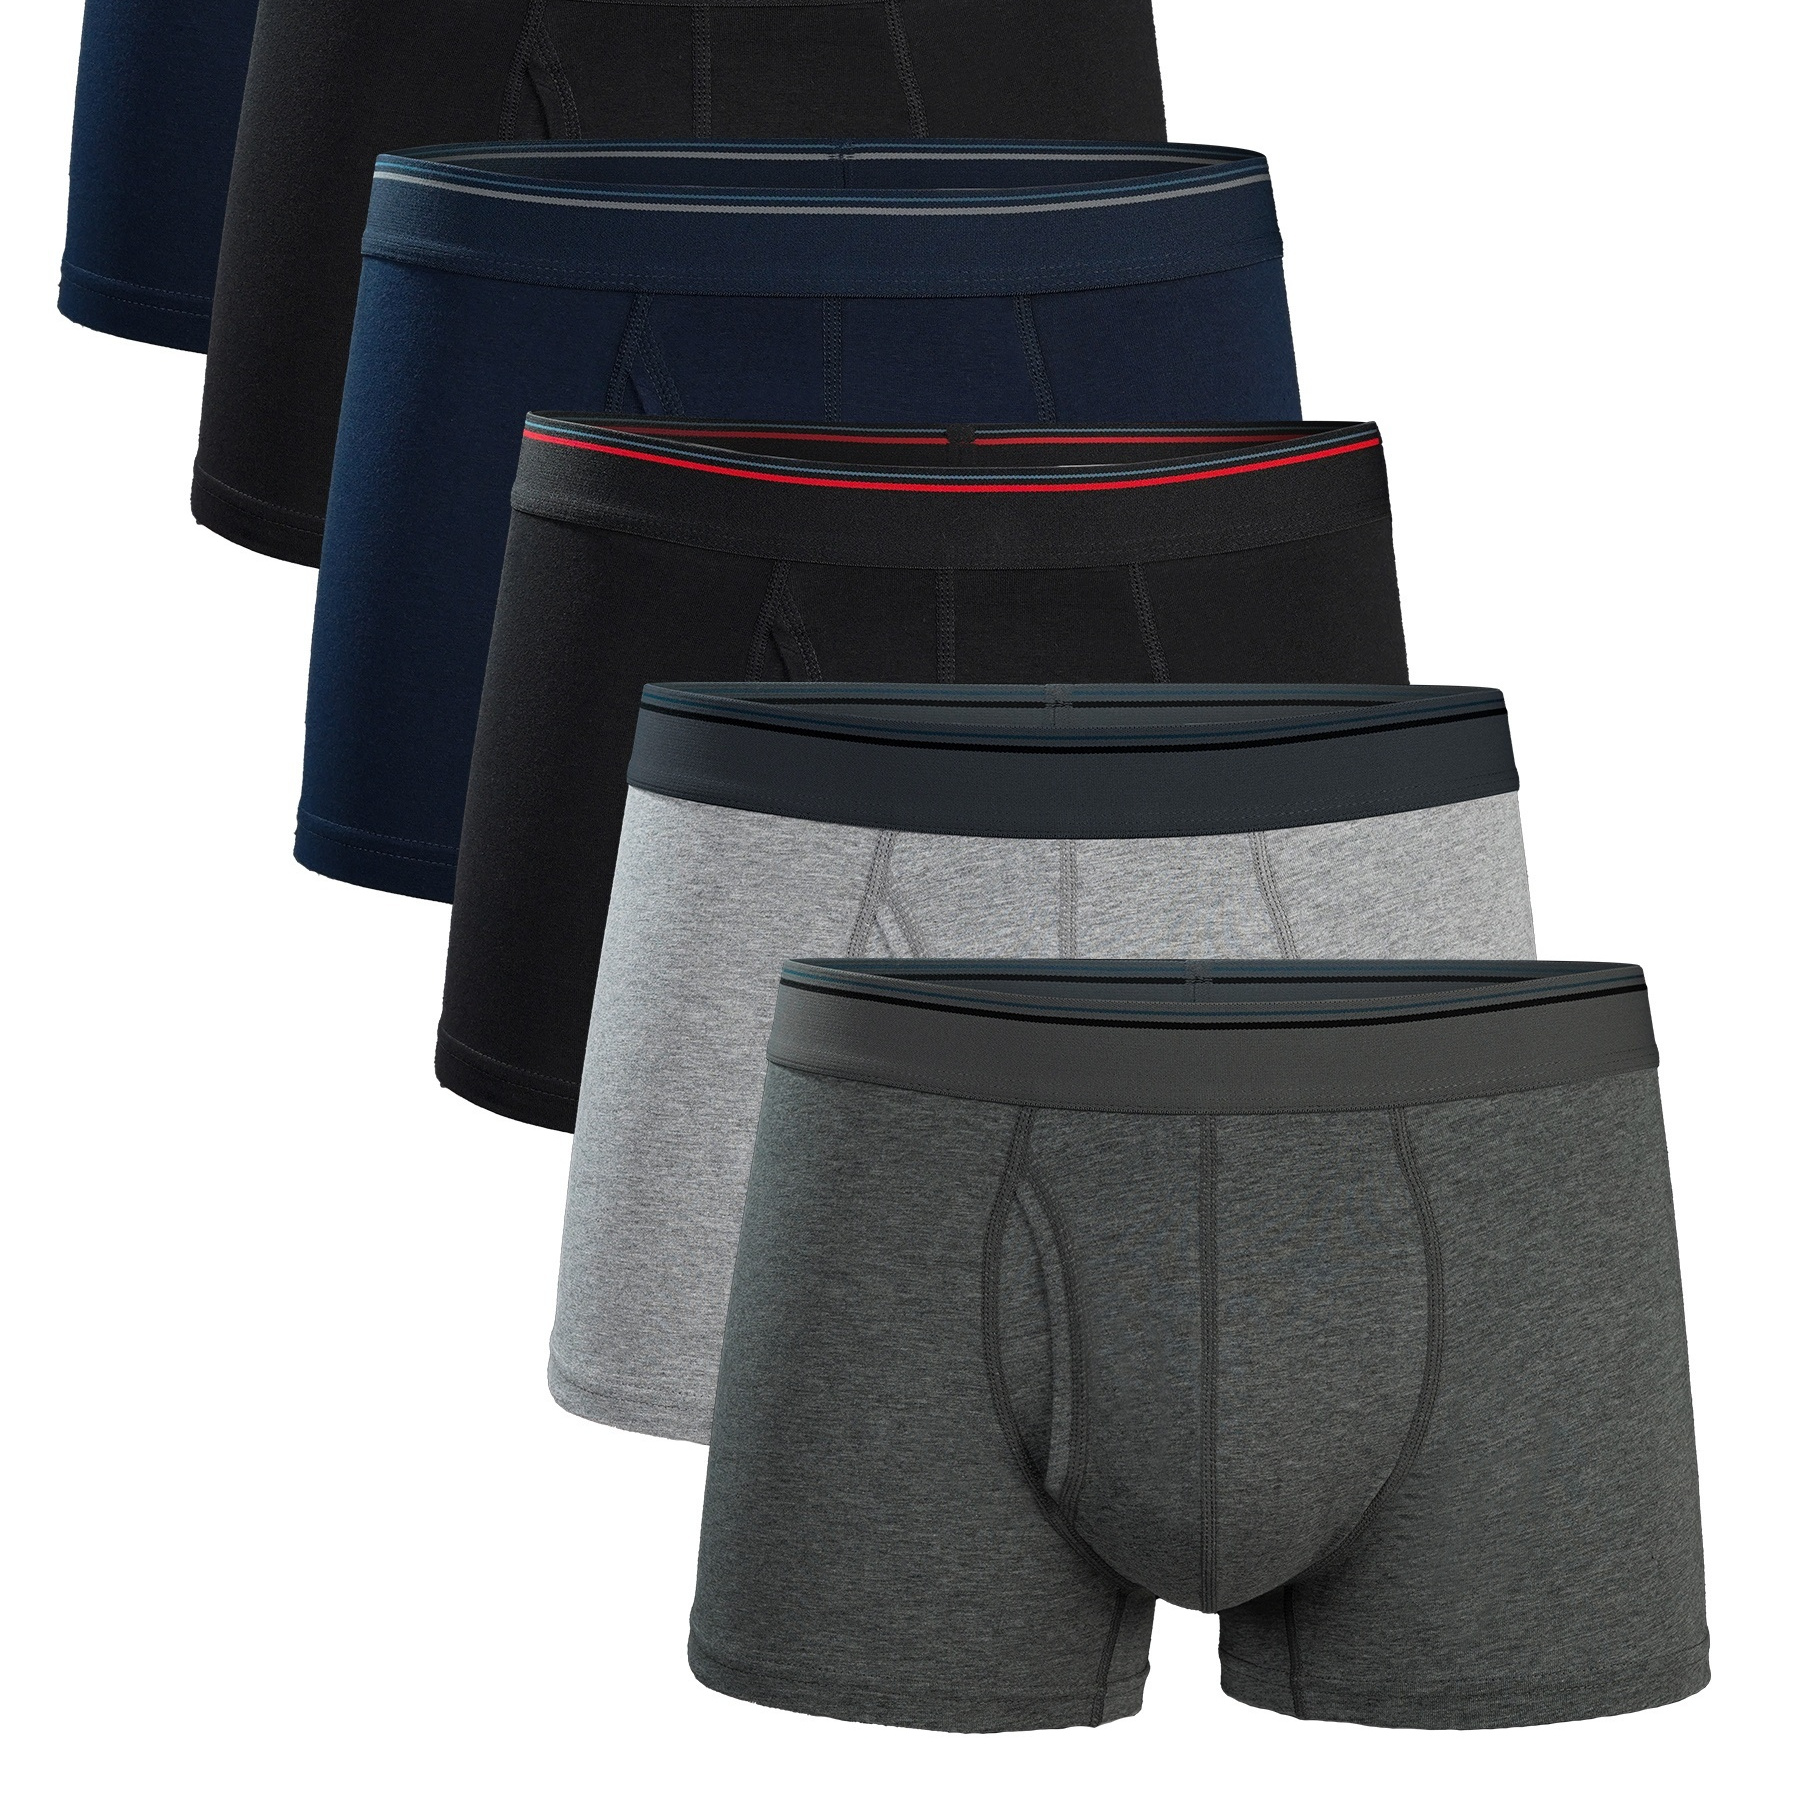 Washable Soft Comfortable Breathable Skin-friendly Plain V Shape Underwear  Boxers Style: Boxer Briefs at Best Price in Indore